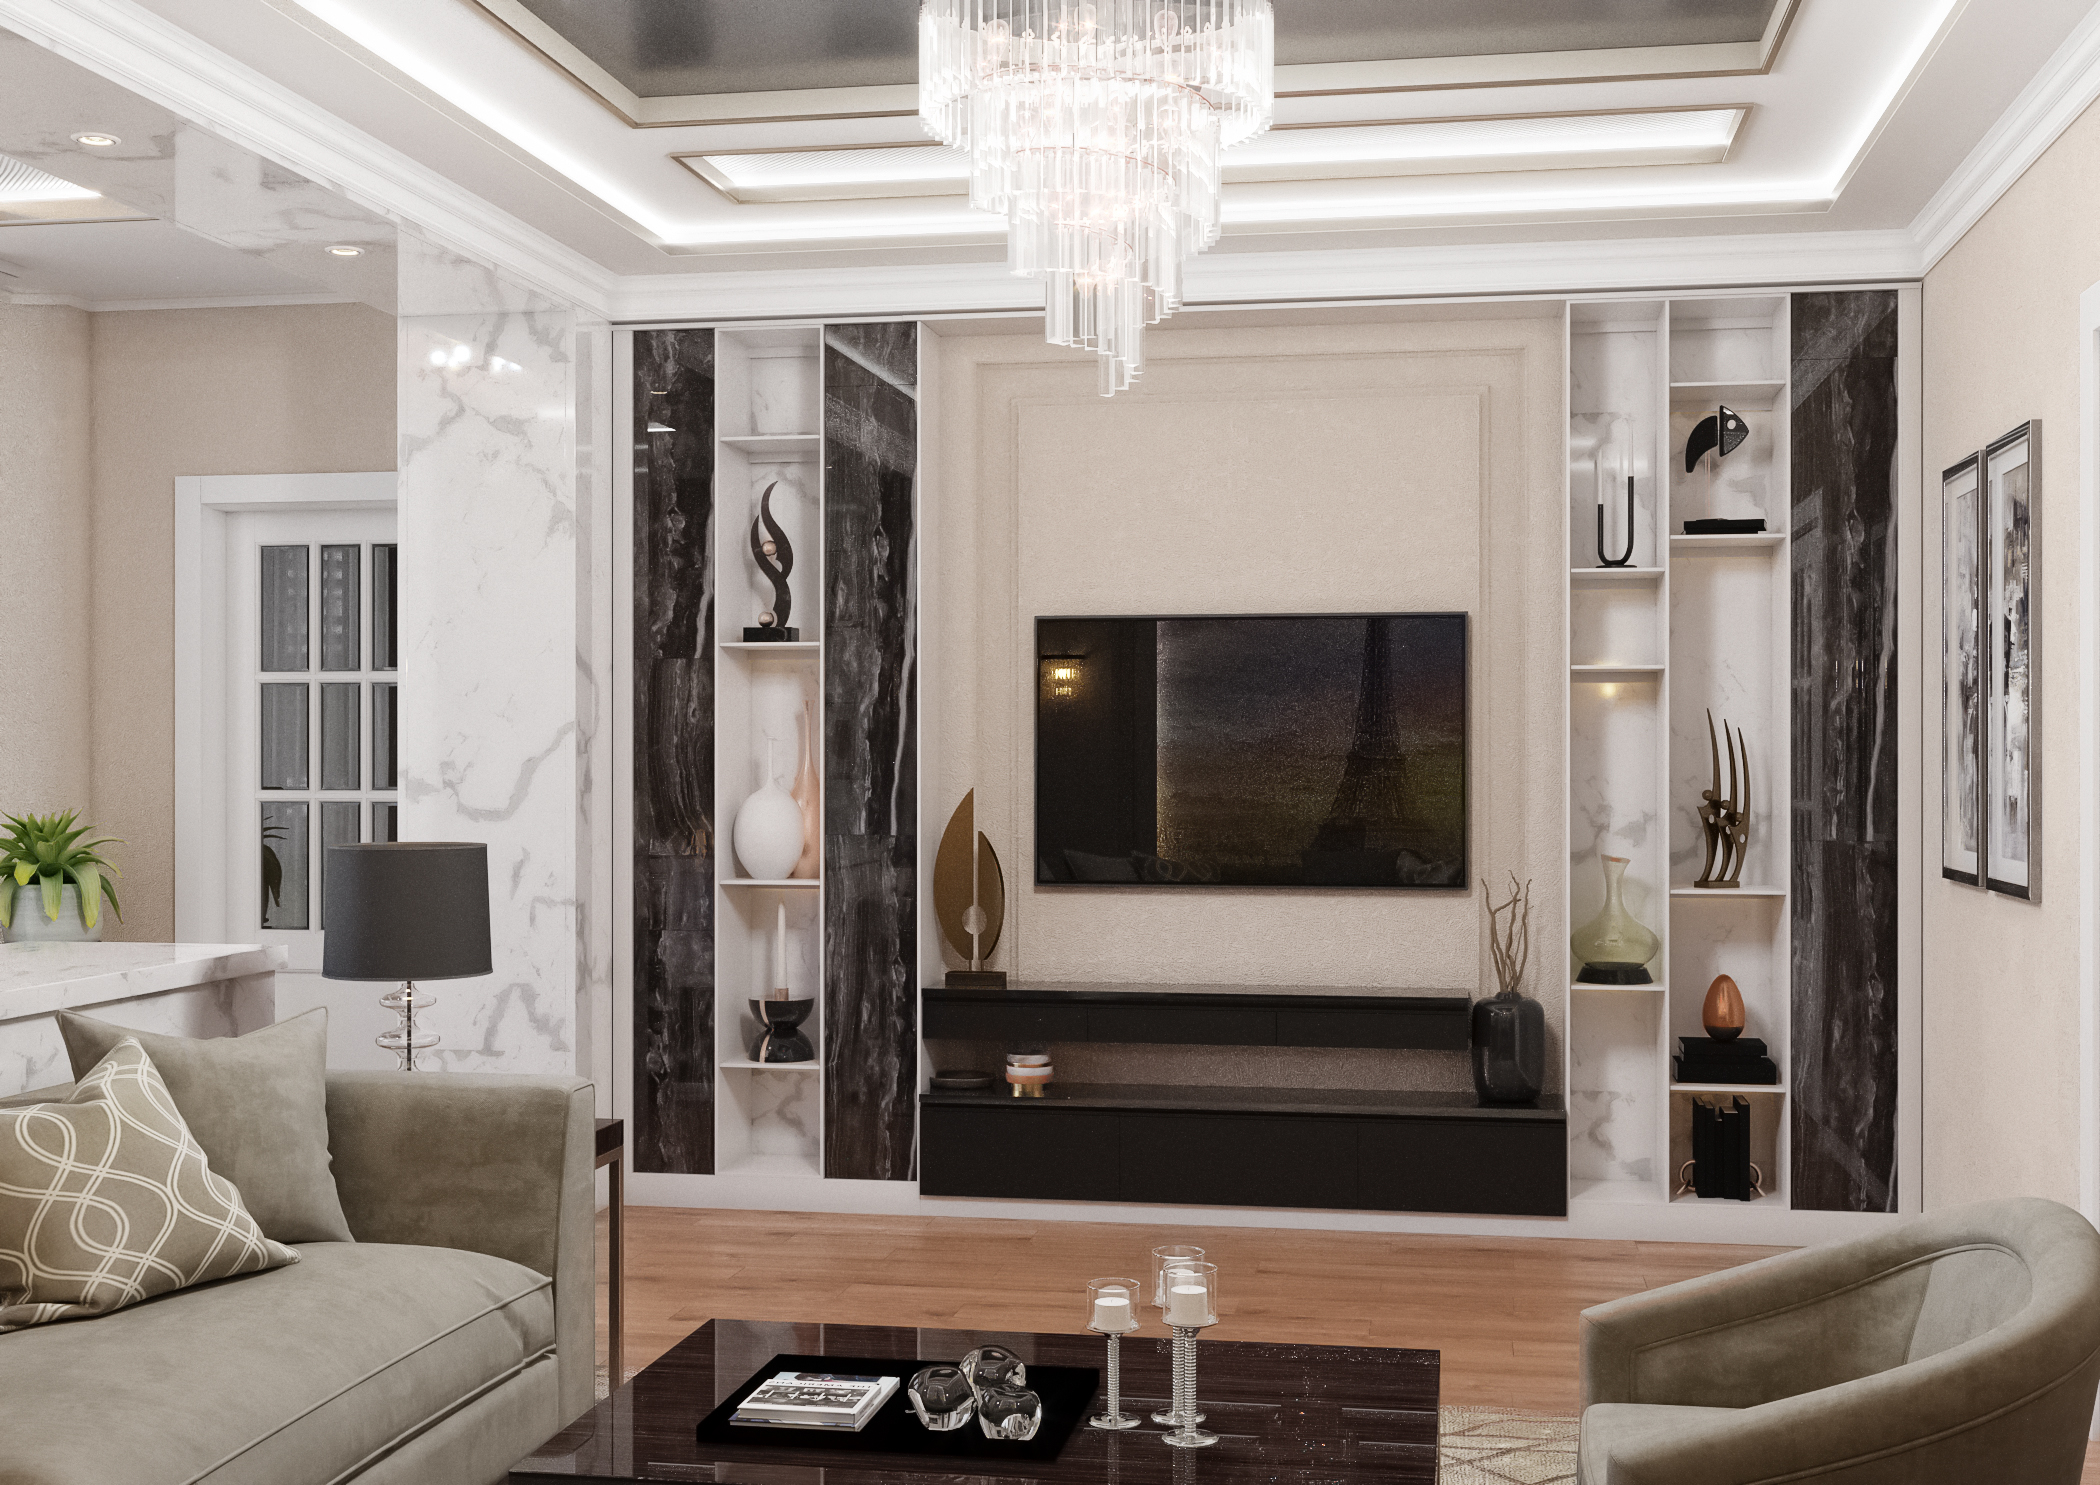 Living-dining room in 3d max corona render image